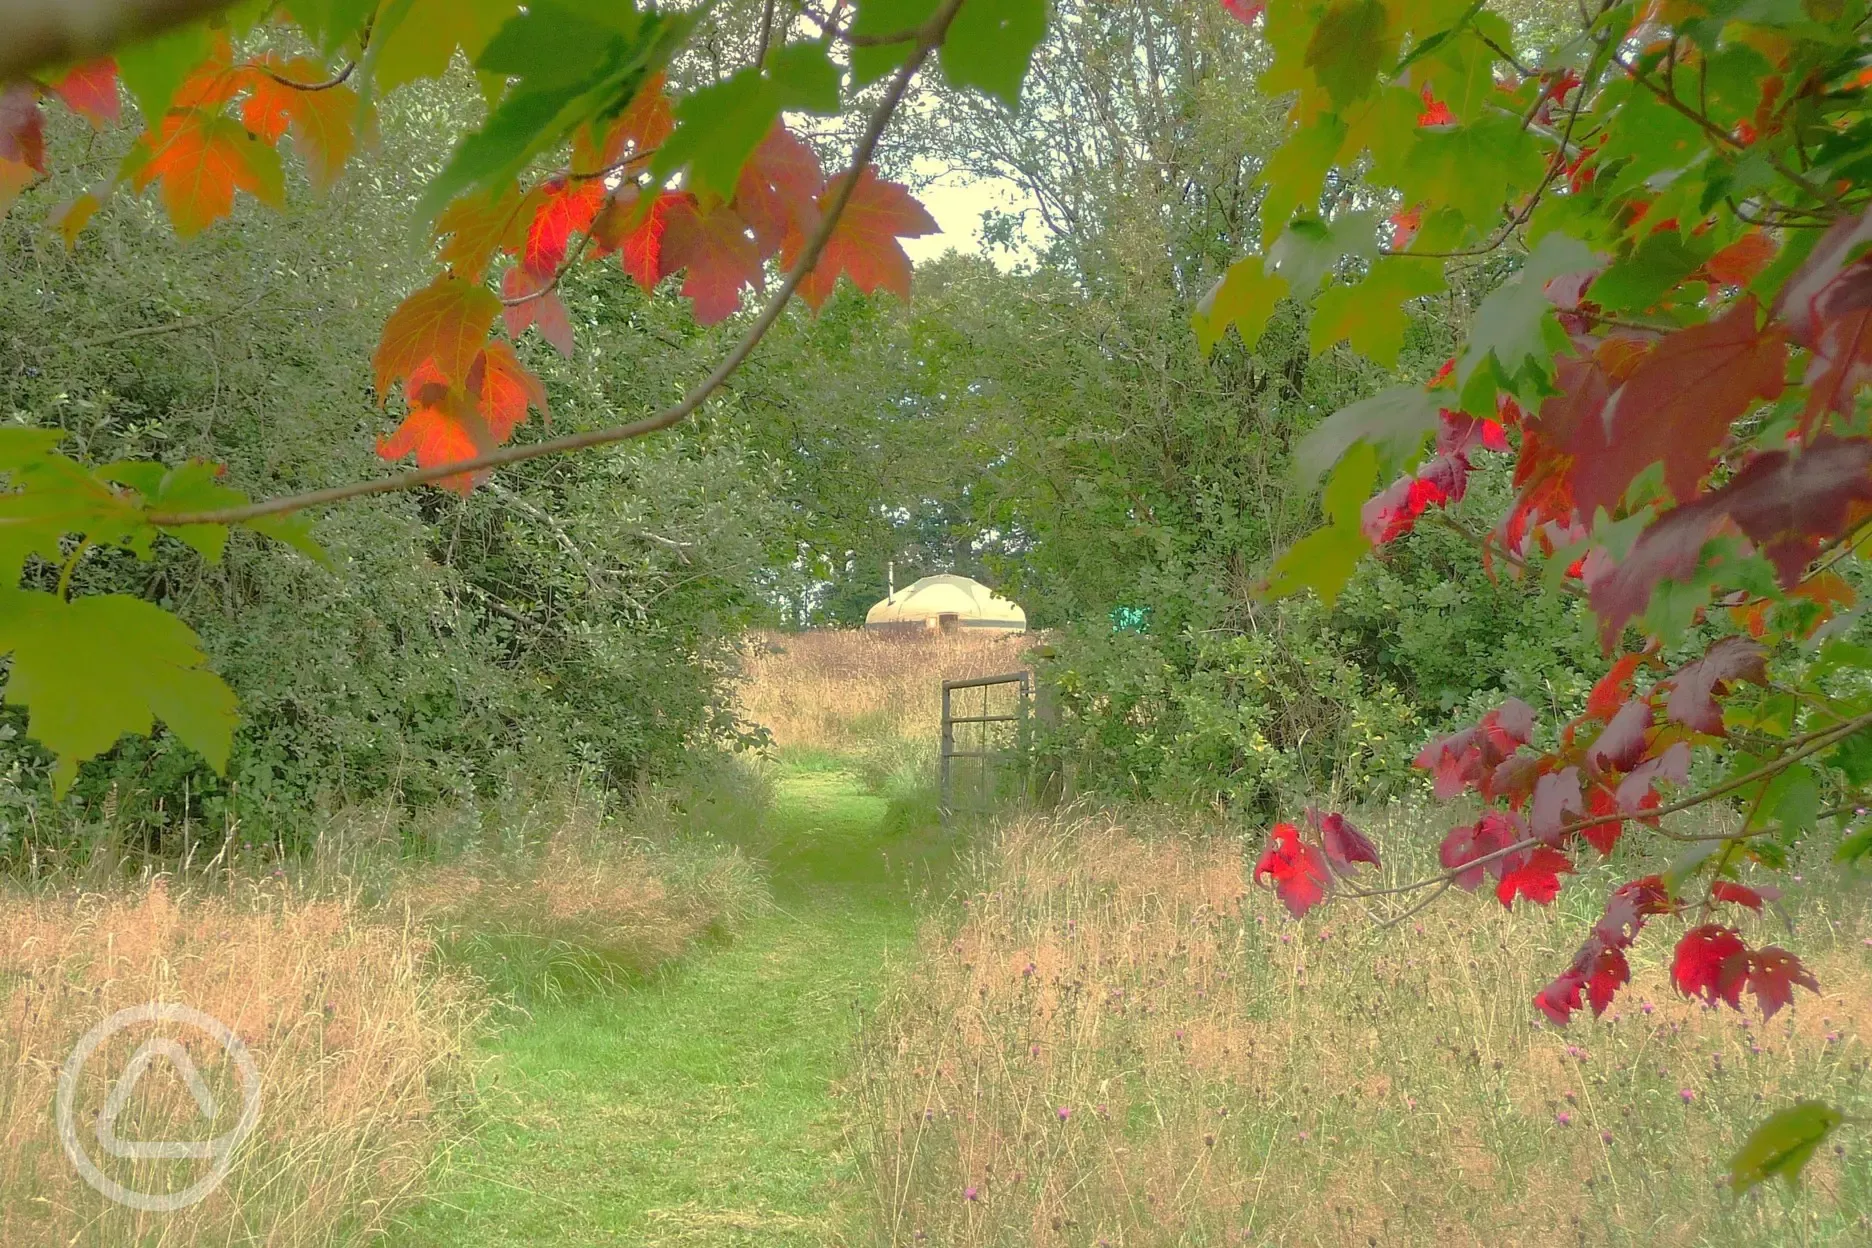 Red Kite Yurt stands on its own in Home Meadow